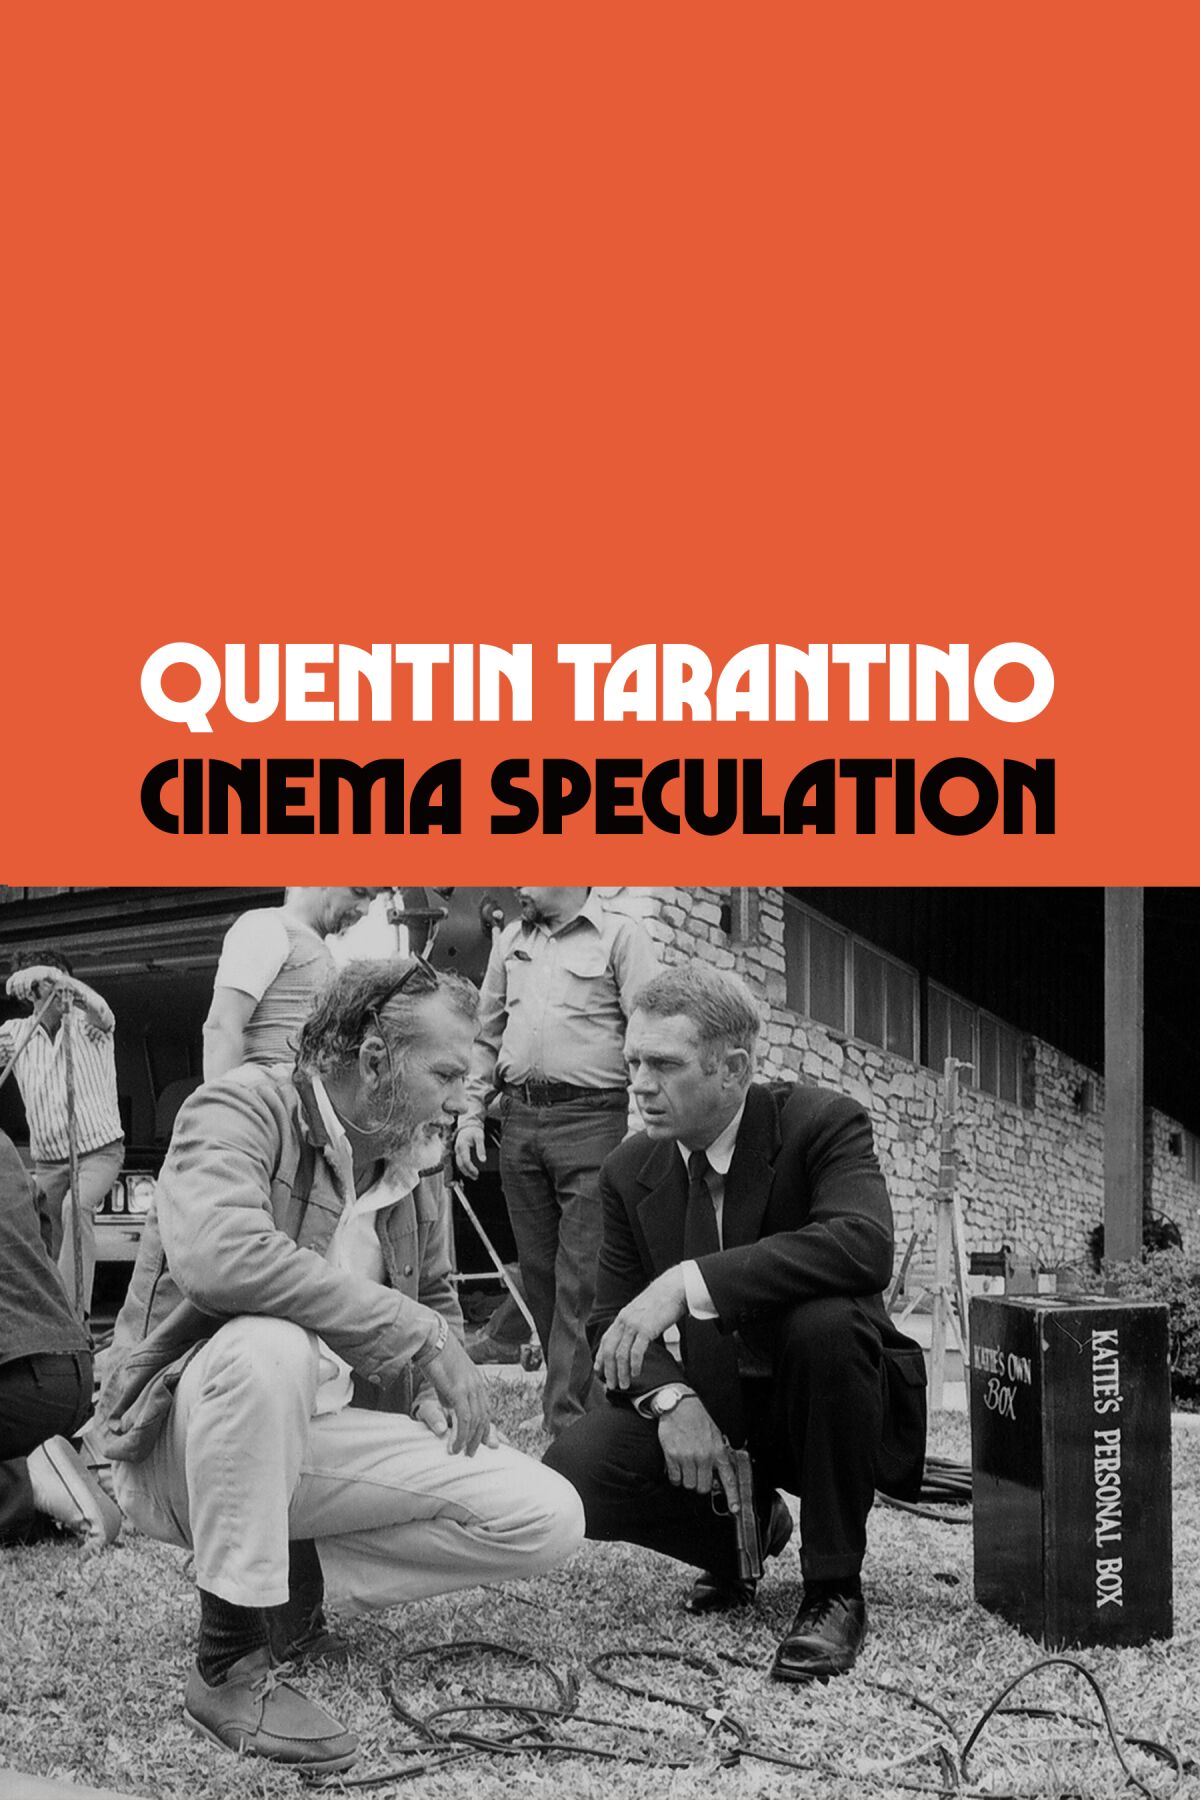 The cover of "Cinema Speculation" by Quentin Tarantino 